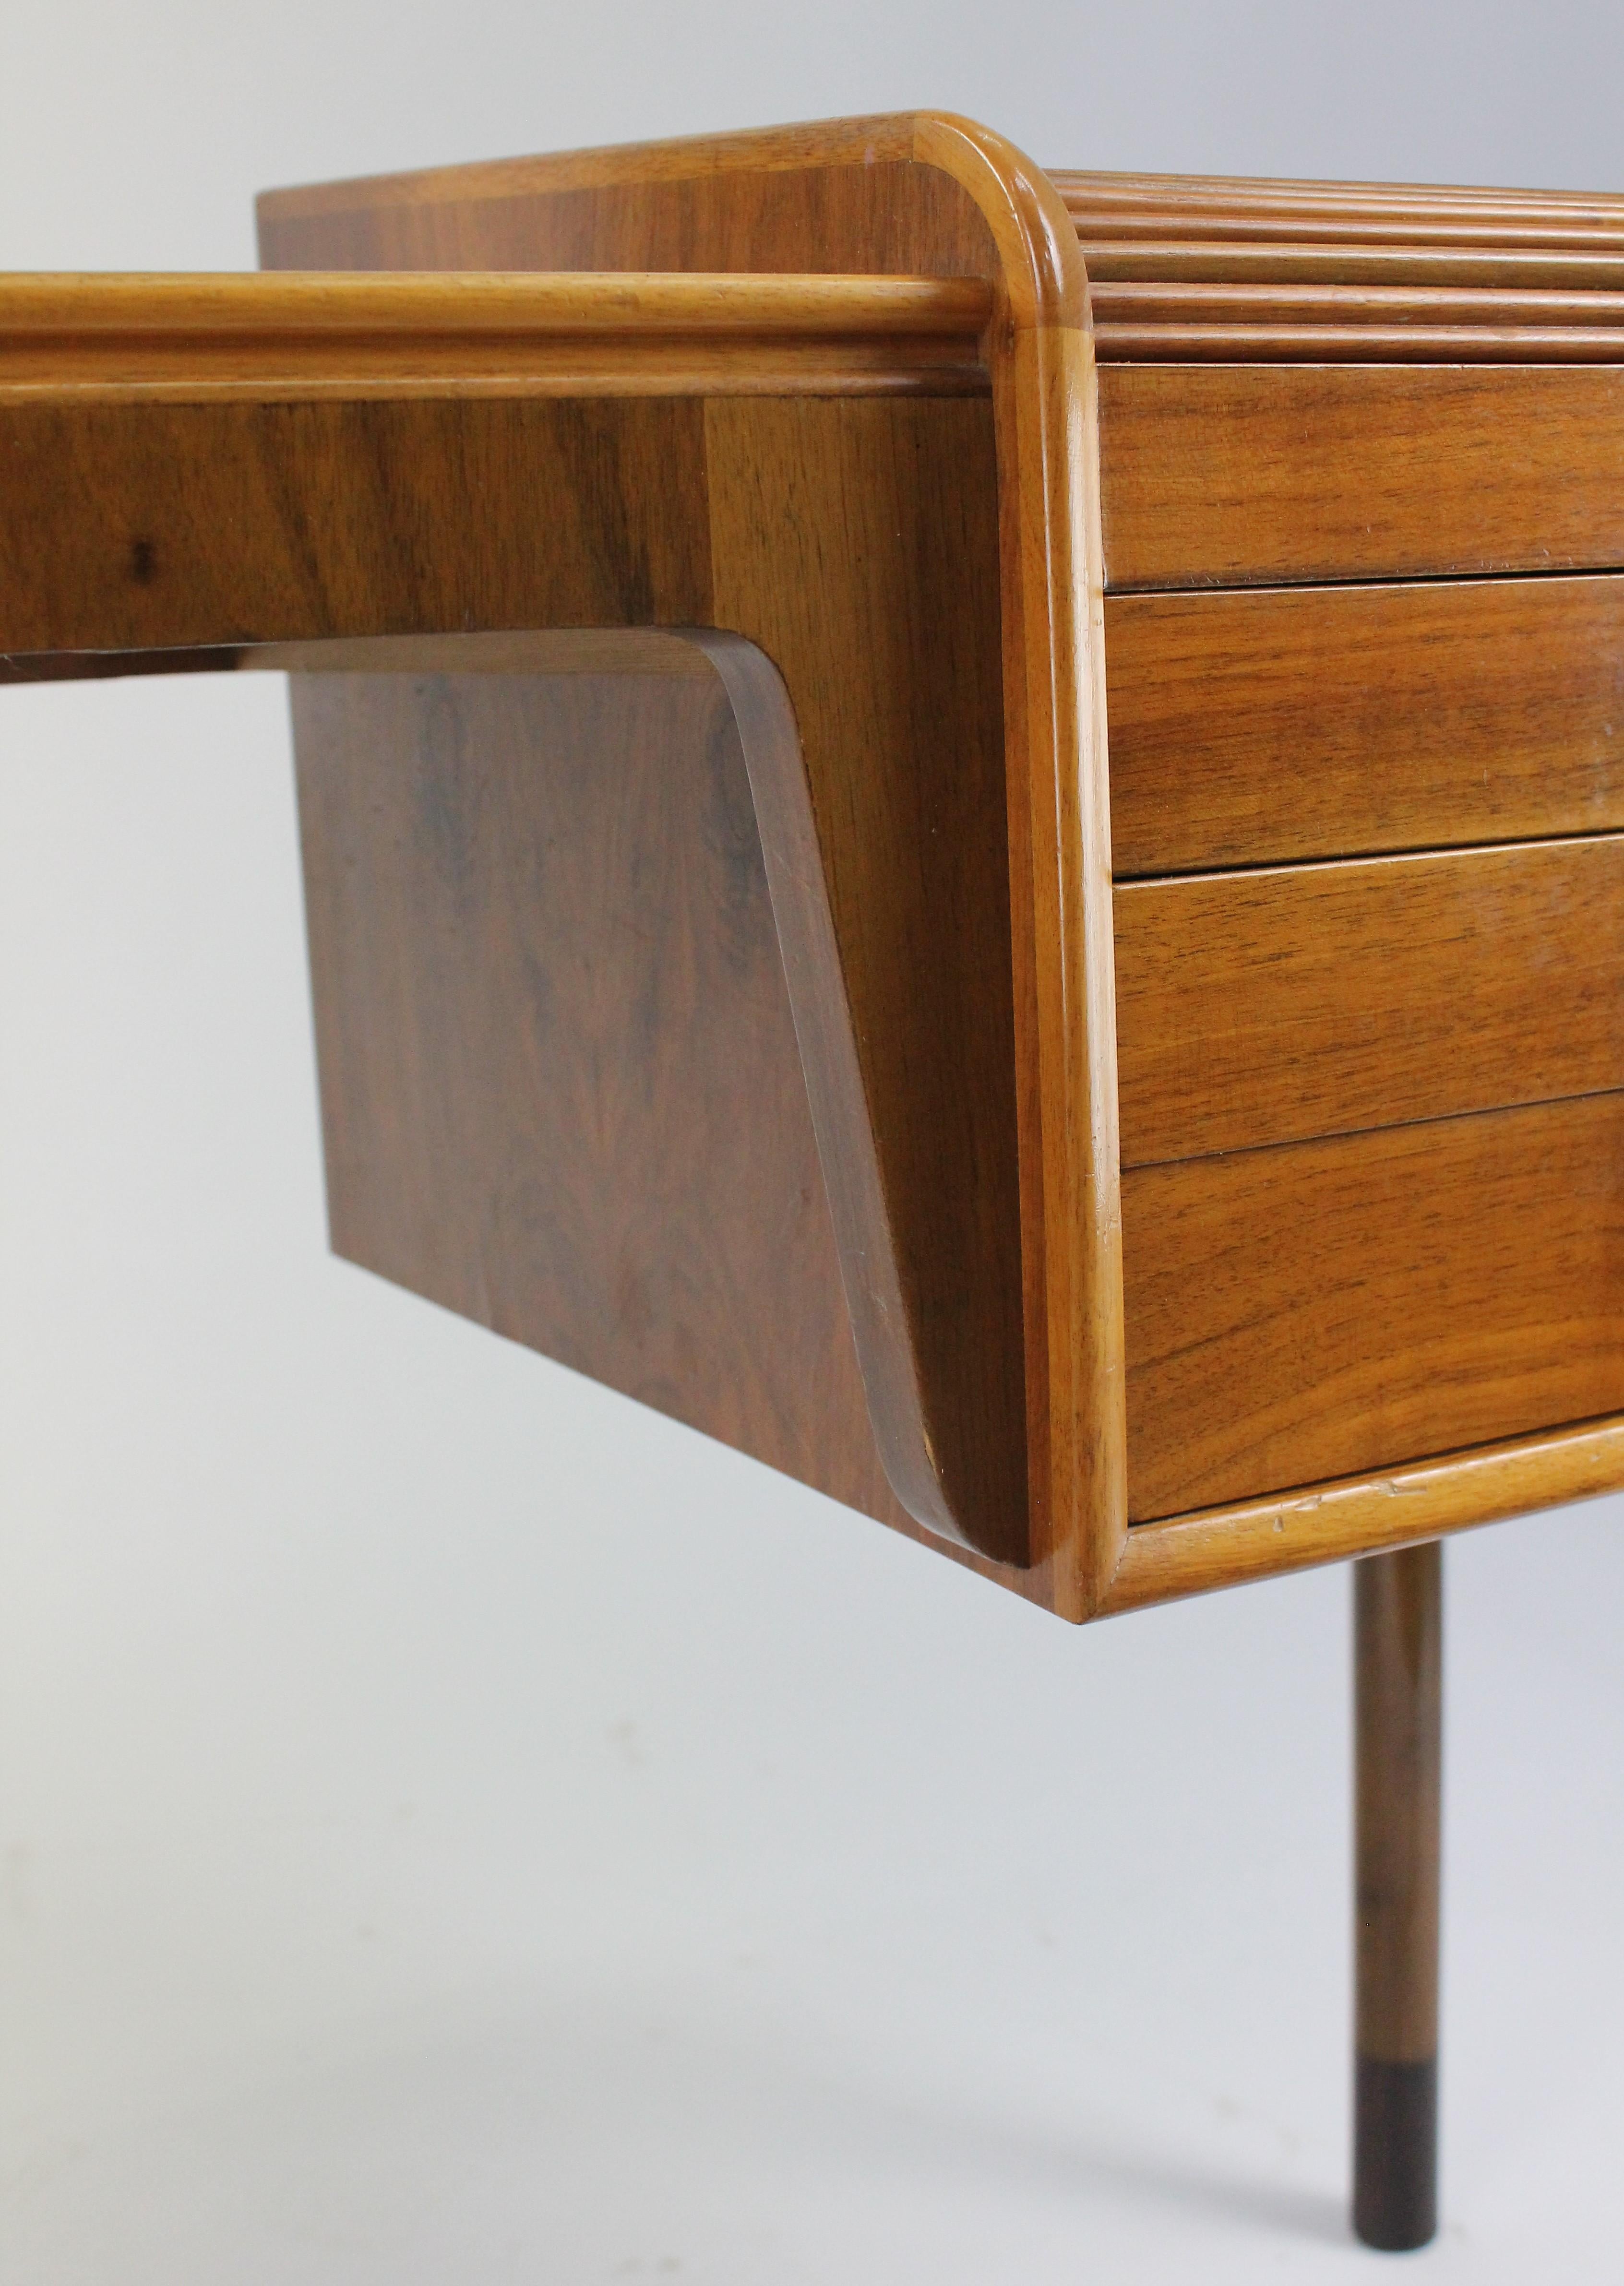 Dressing Table or a Small Writing Desk, Swedish 1940s-1950s by Carl-Axel Acking 4